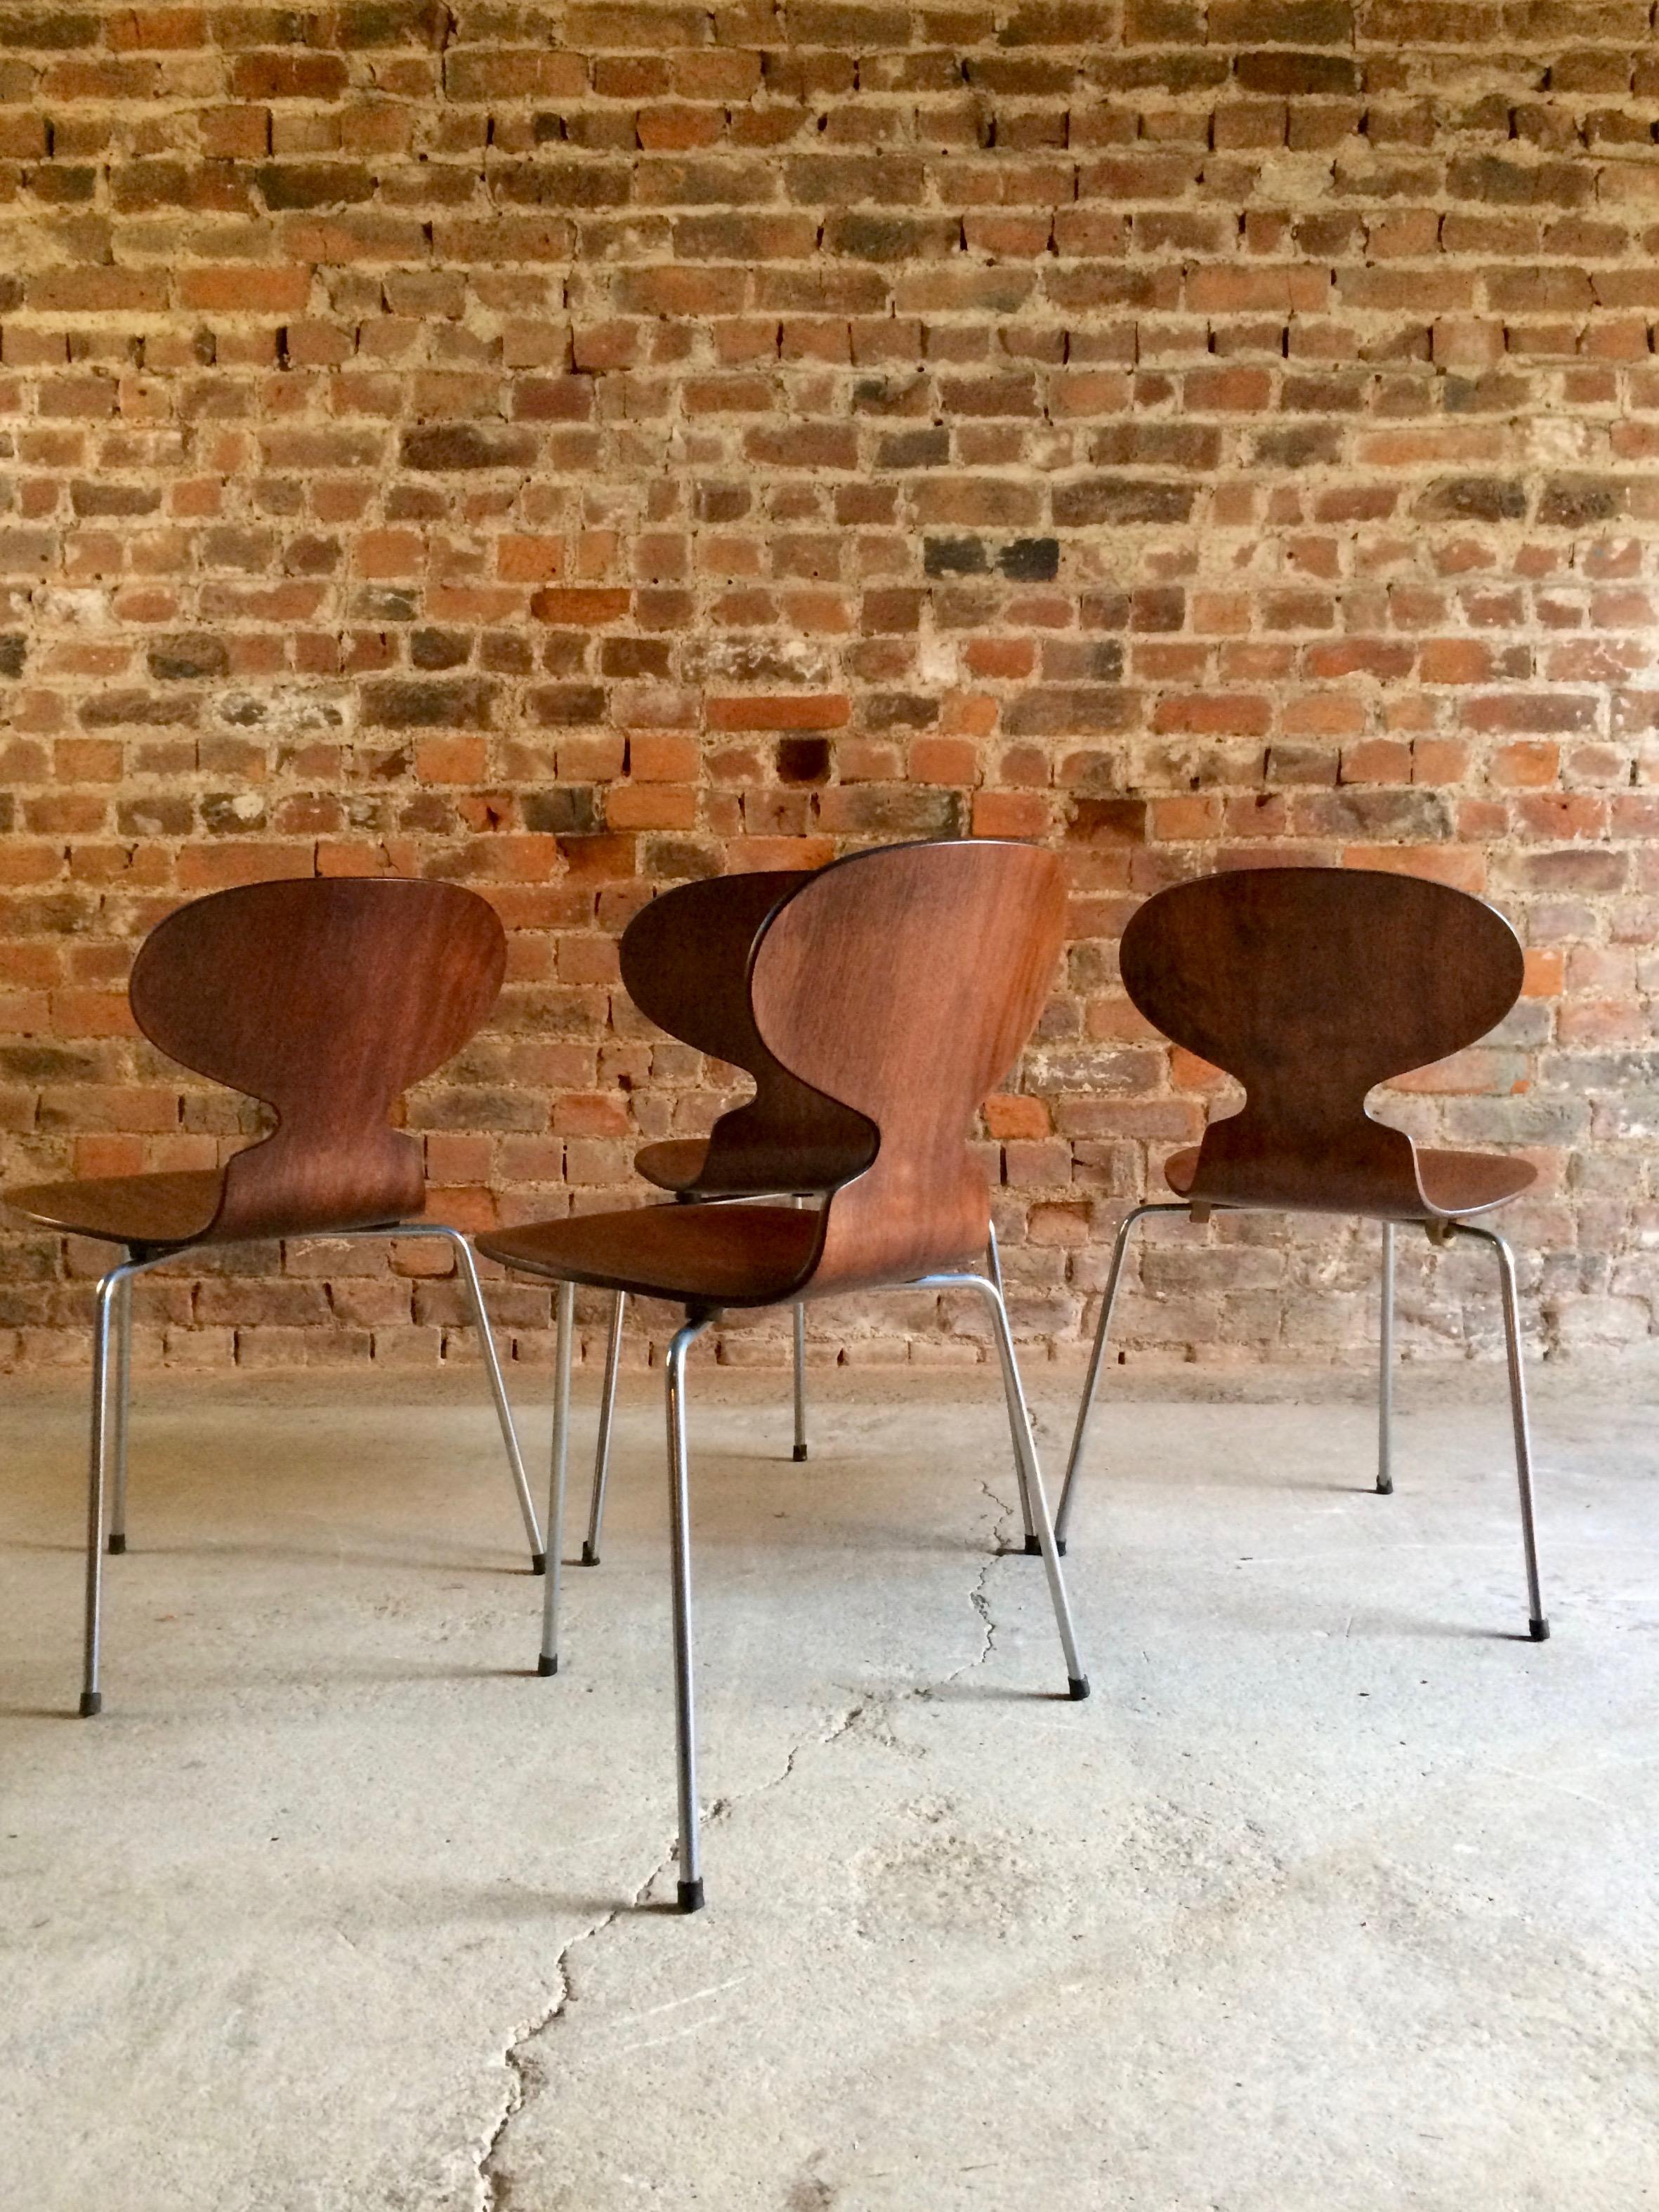 Mid-20th Century Arne Jacobsen Table and Four Ant Chairs Danish 1950s Midcentury Fritz Hansen